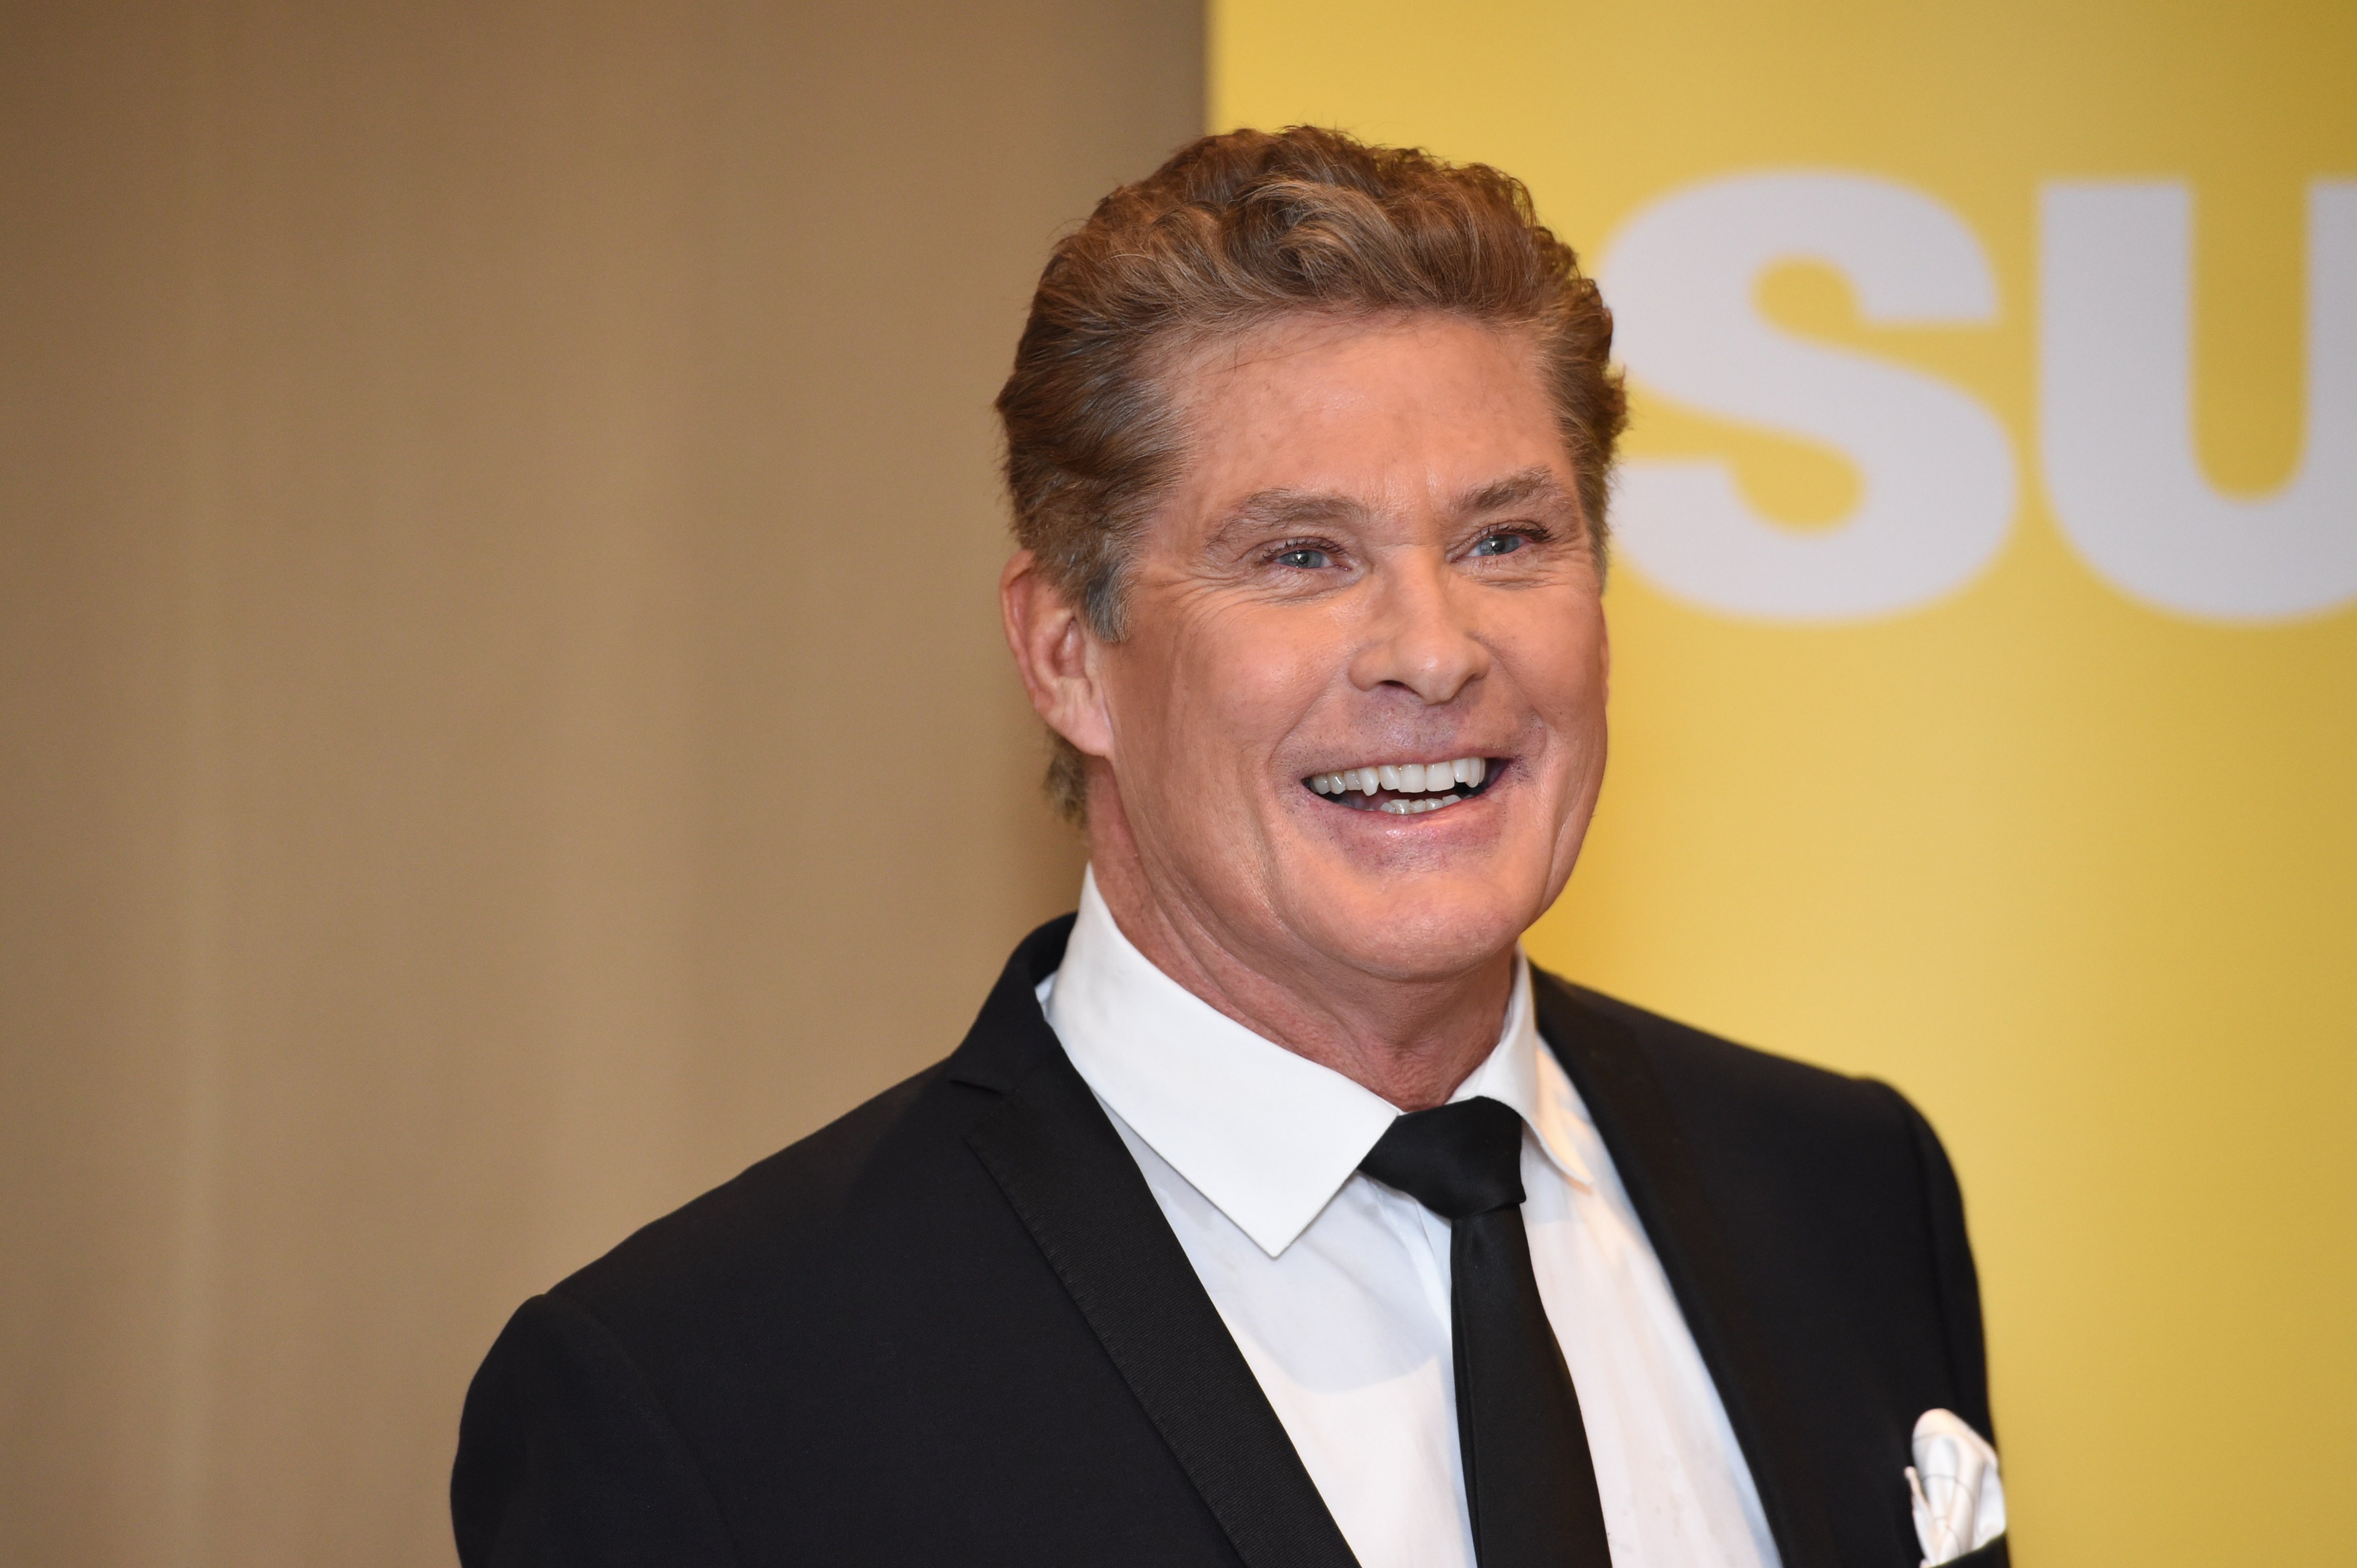 American actor and personality David Hasselhoff during a press conference in Helsinki, Finland on Jan. 16, 2015. (All Over Press—AP)